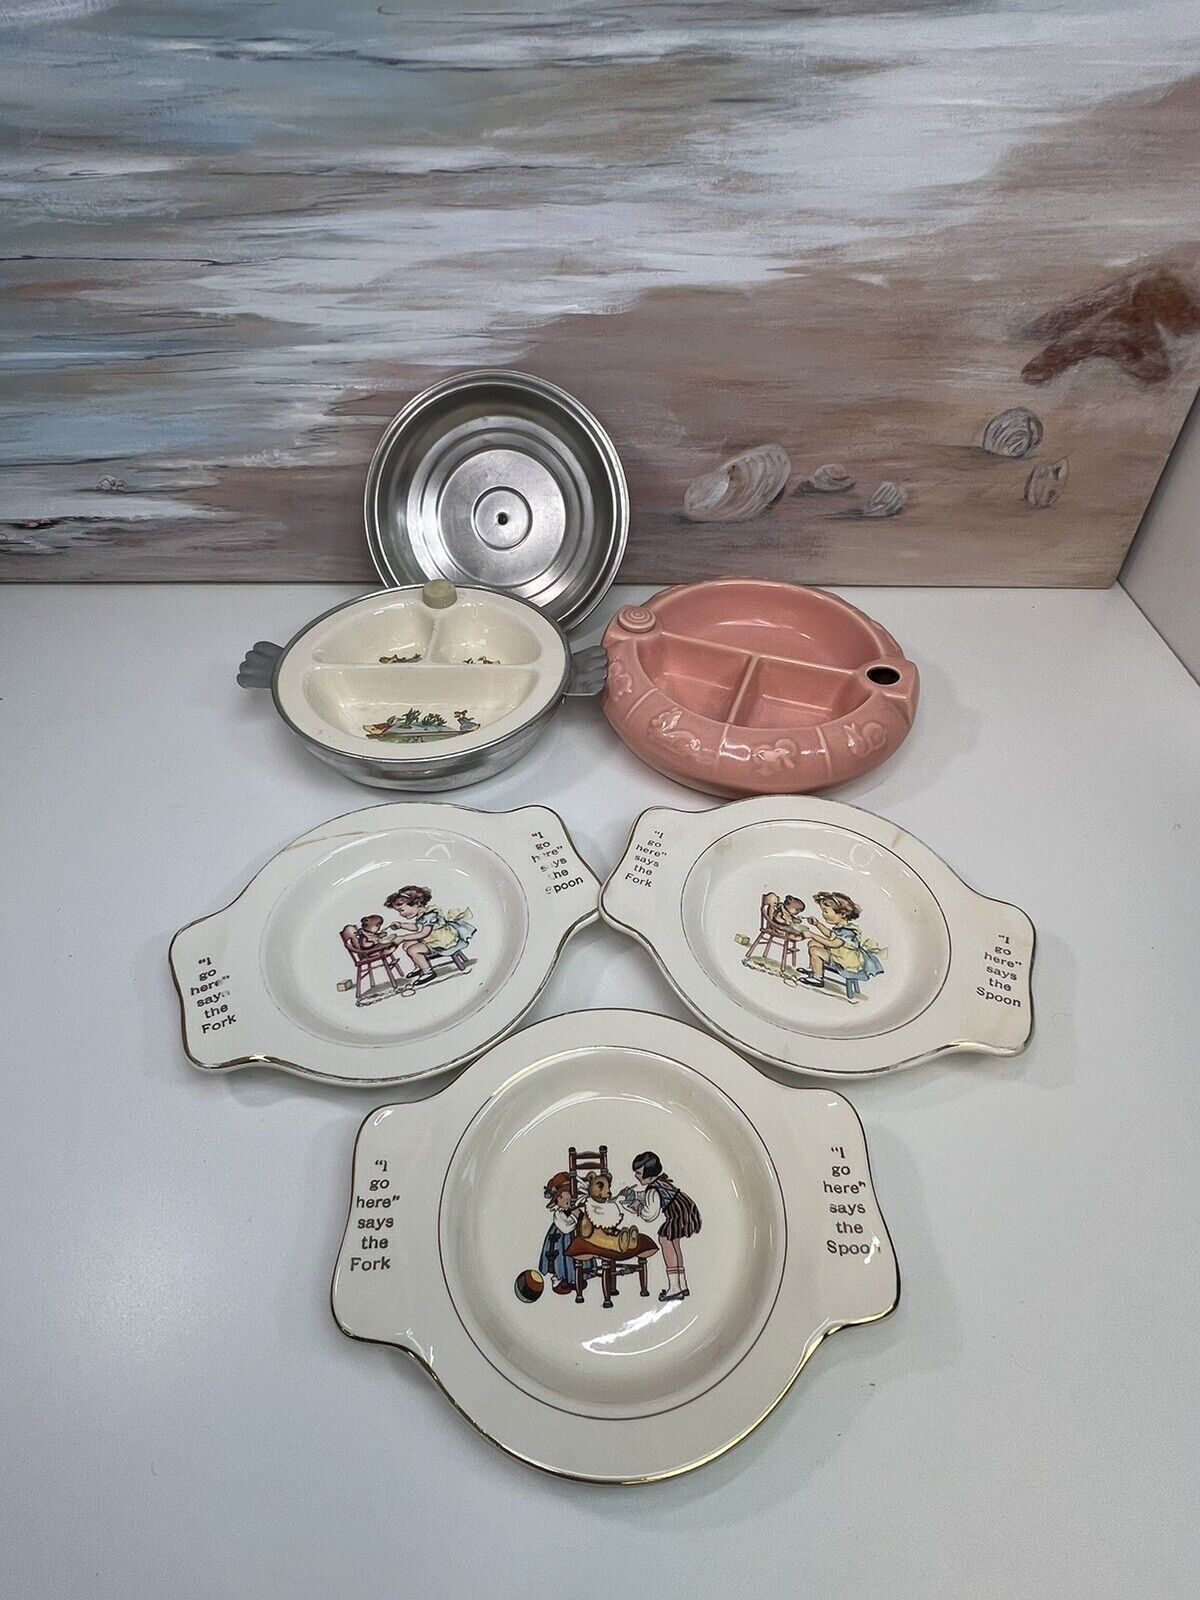 Vtg Antique Baby Feeding Dishes And Warming Plates Lot “I Go Here Said The Fork”